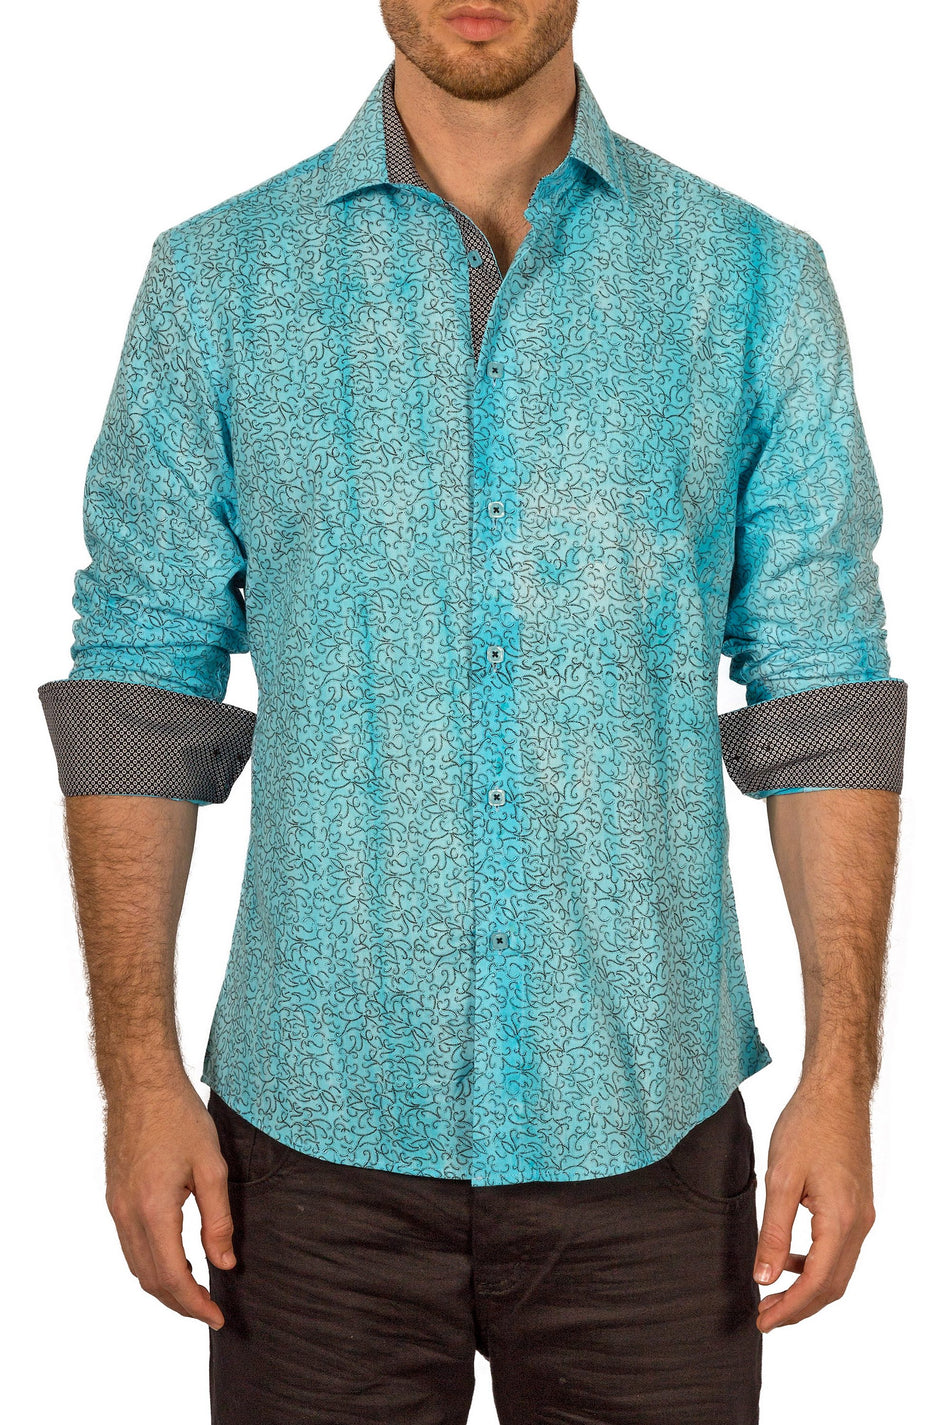 Men's Turquoise Abstract Pattern Long Sleeve Button Up